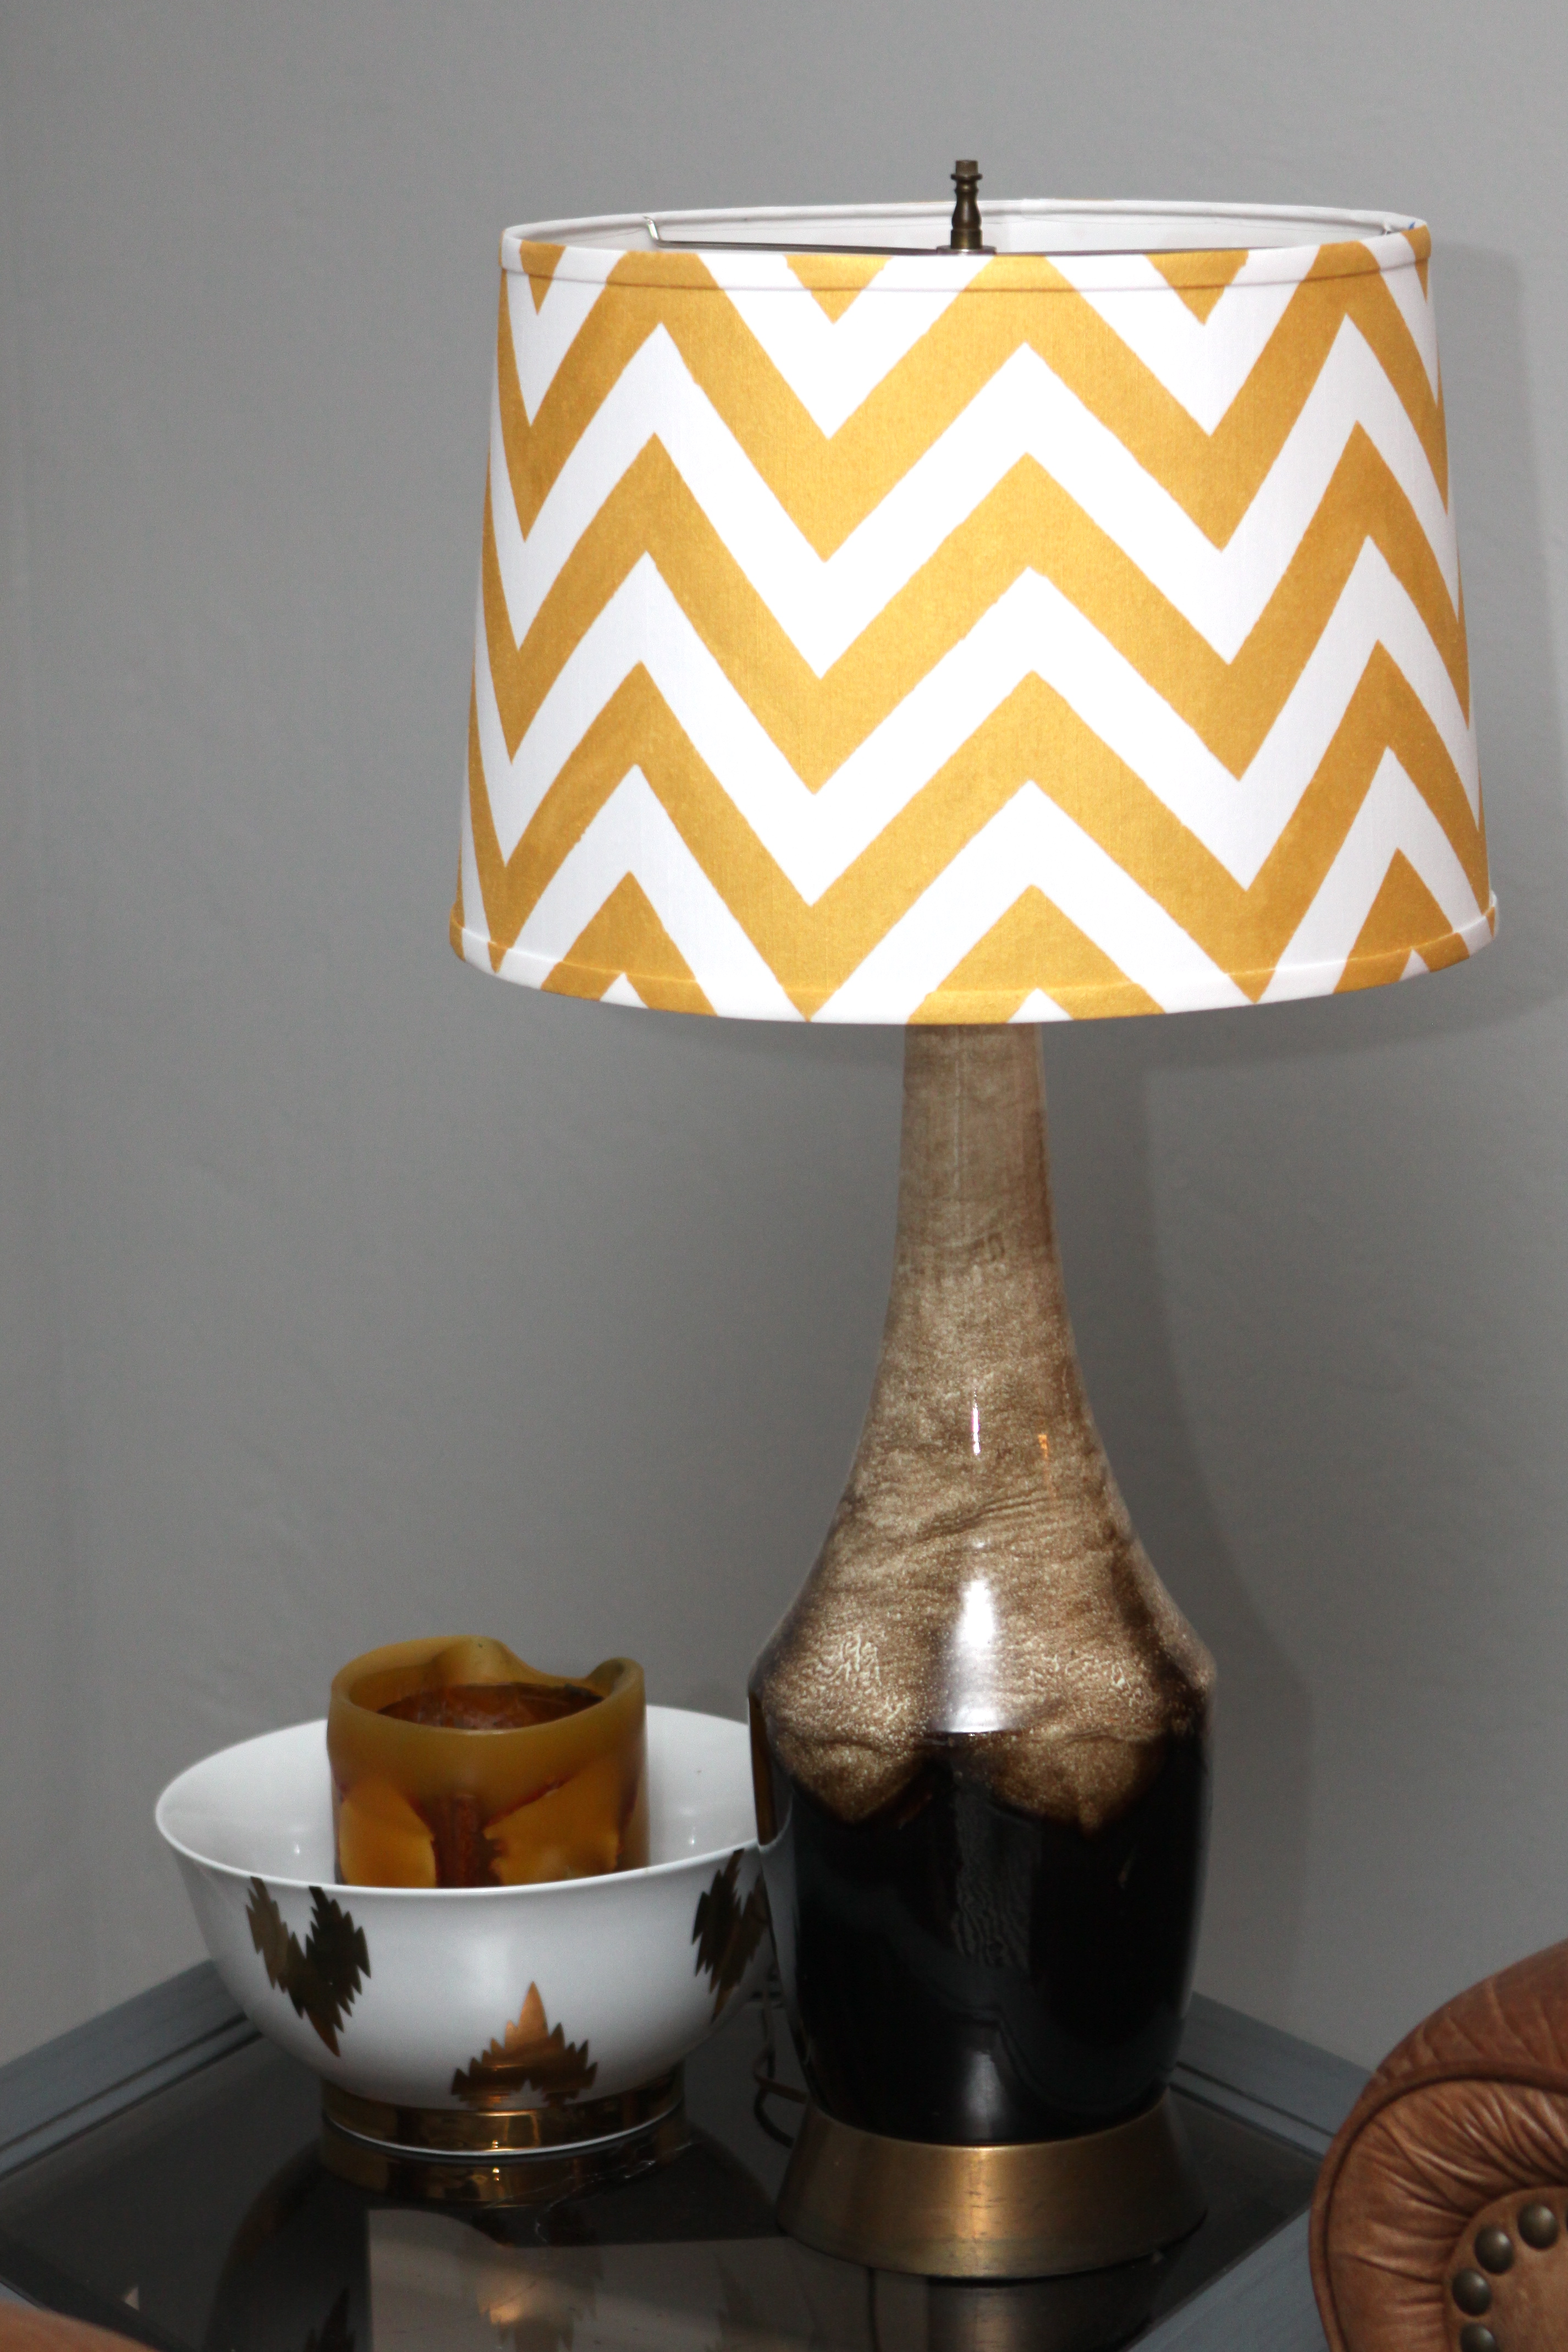 23 Ways To Diy And Redo A Lampshade, How To Make A Diy Lampshade Step By